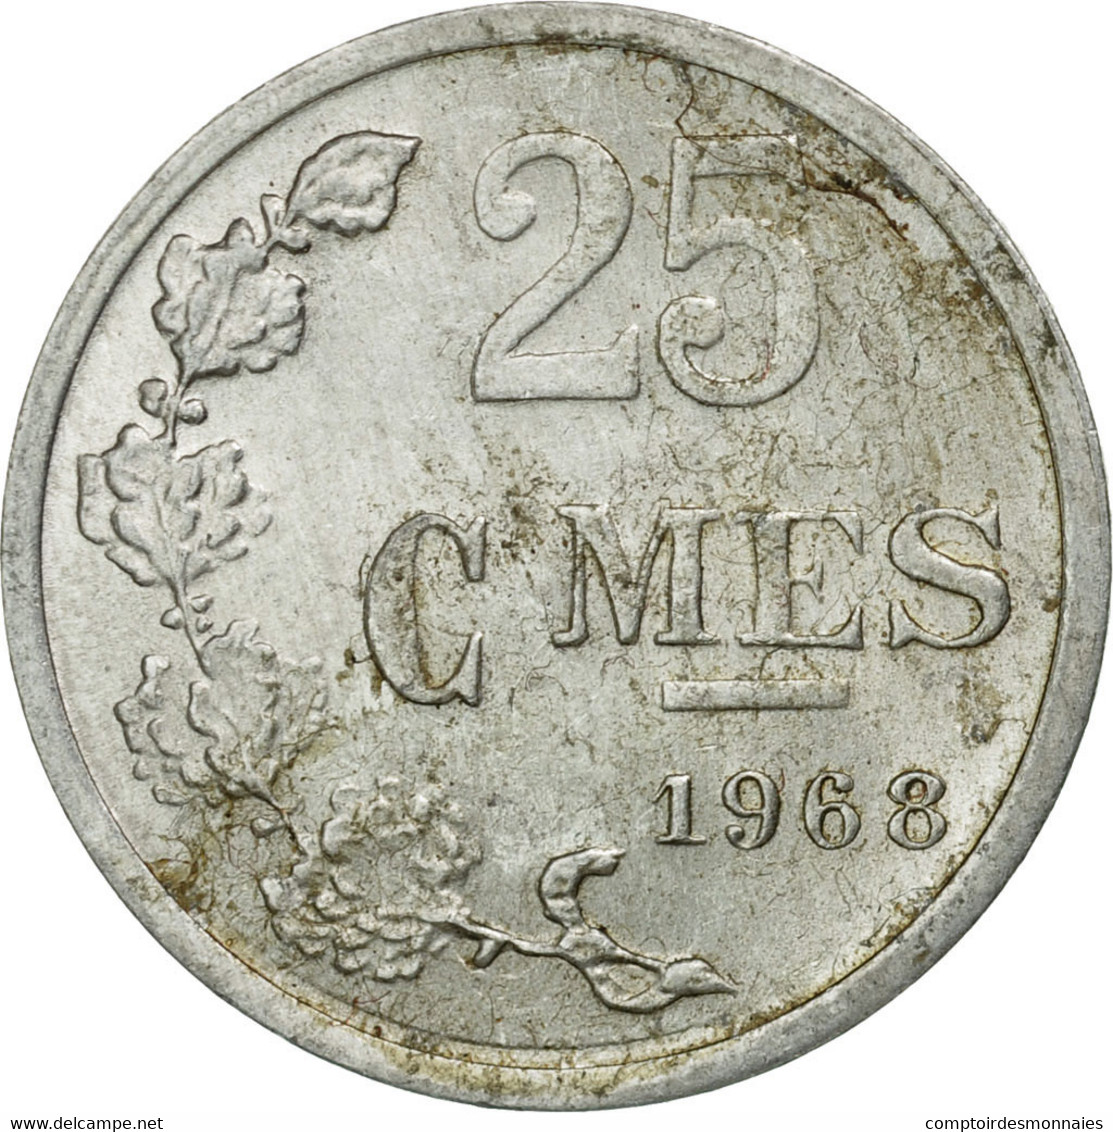 Monnaie, Luxembourg, Jean, 25 Centimes, 1968, B+, Aluminium, KM:45a.1 - Luxembourg